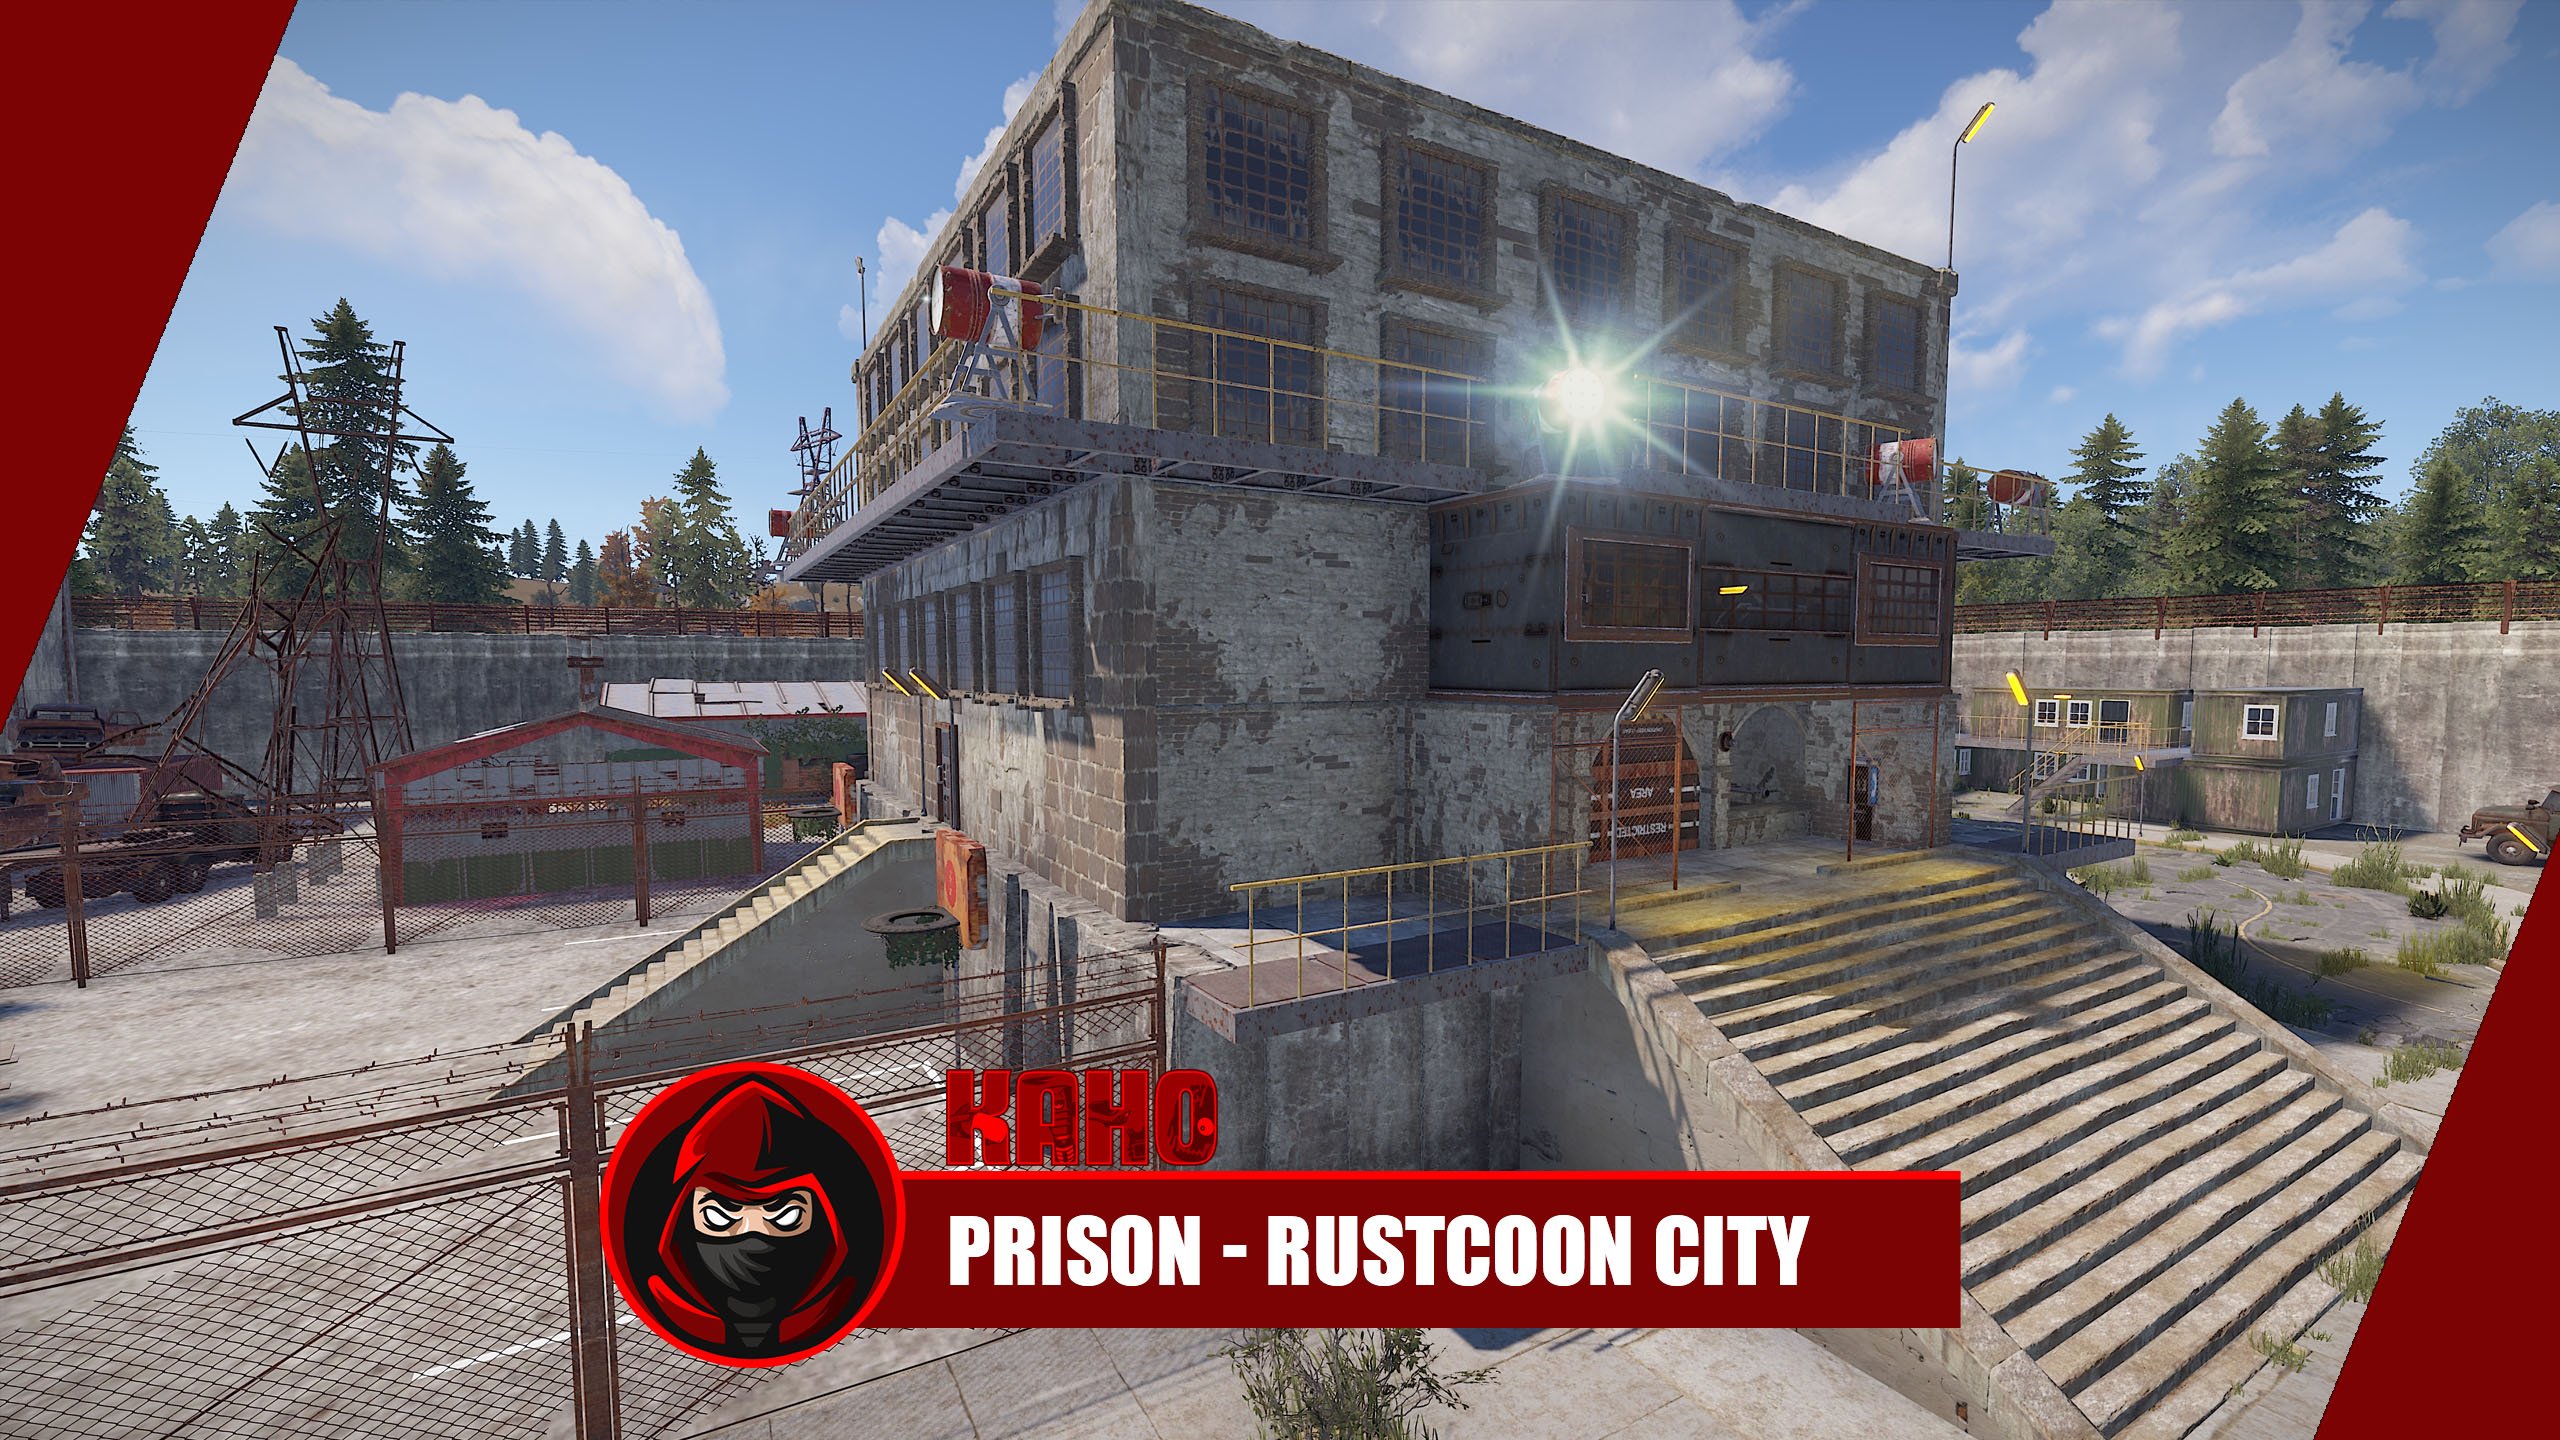 The Prison - Rustcoon City